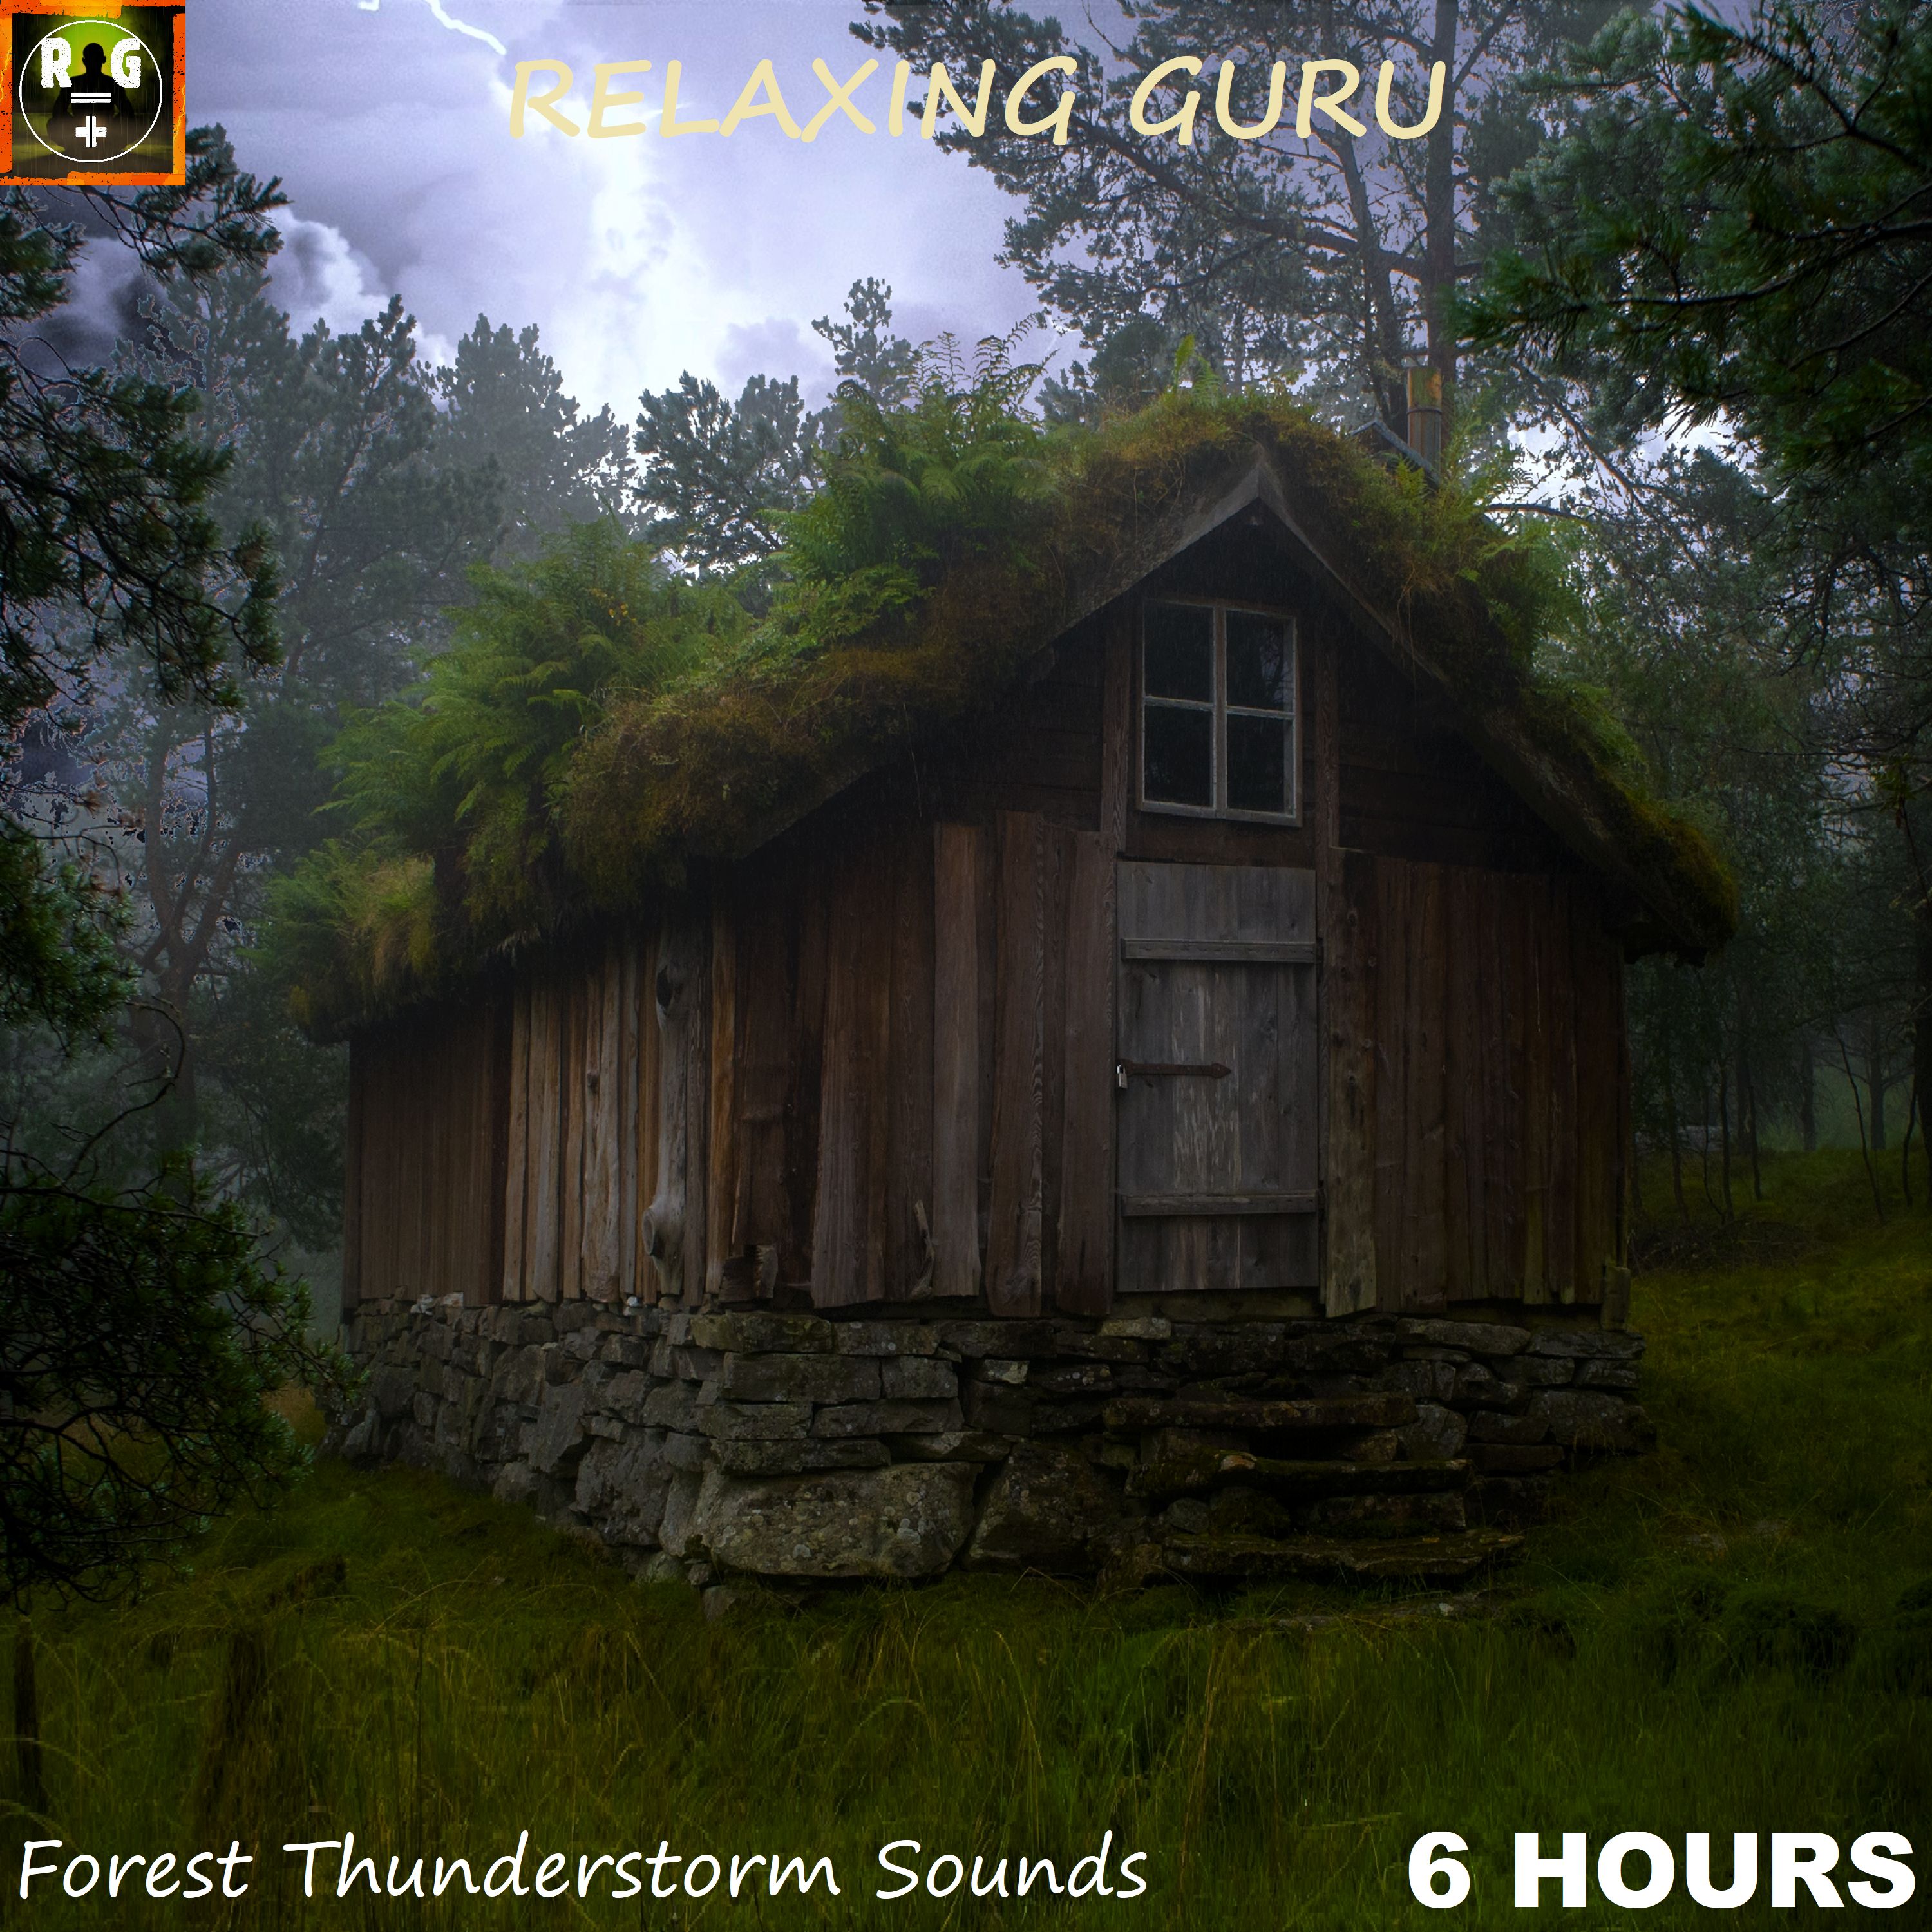 Prenesi Relaxing Rain & Thunder on a Wooden Hut deep in the Forest - Thunderstorm Sounds for Sleep (6 HOURS)